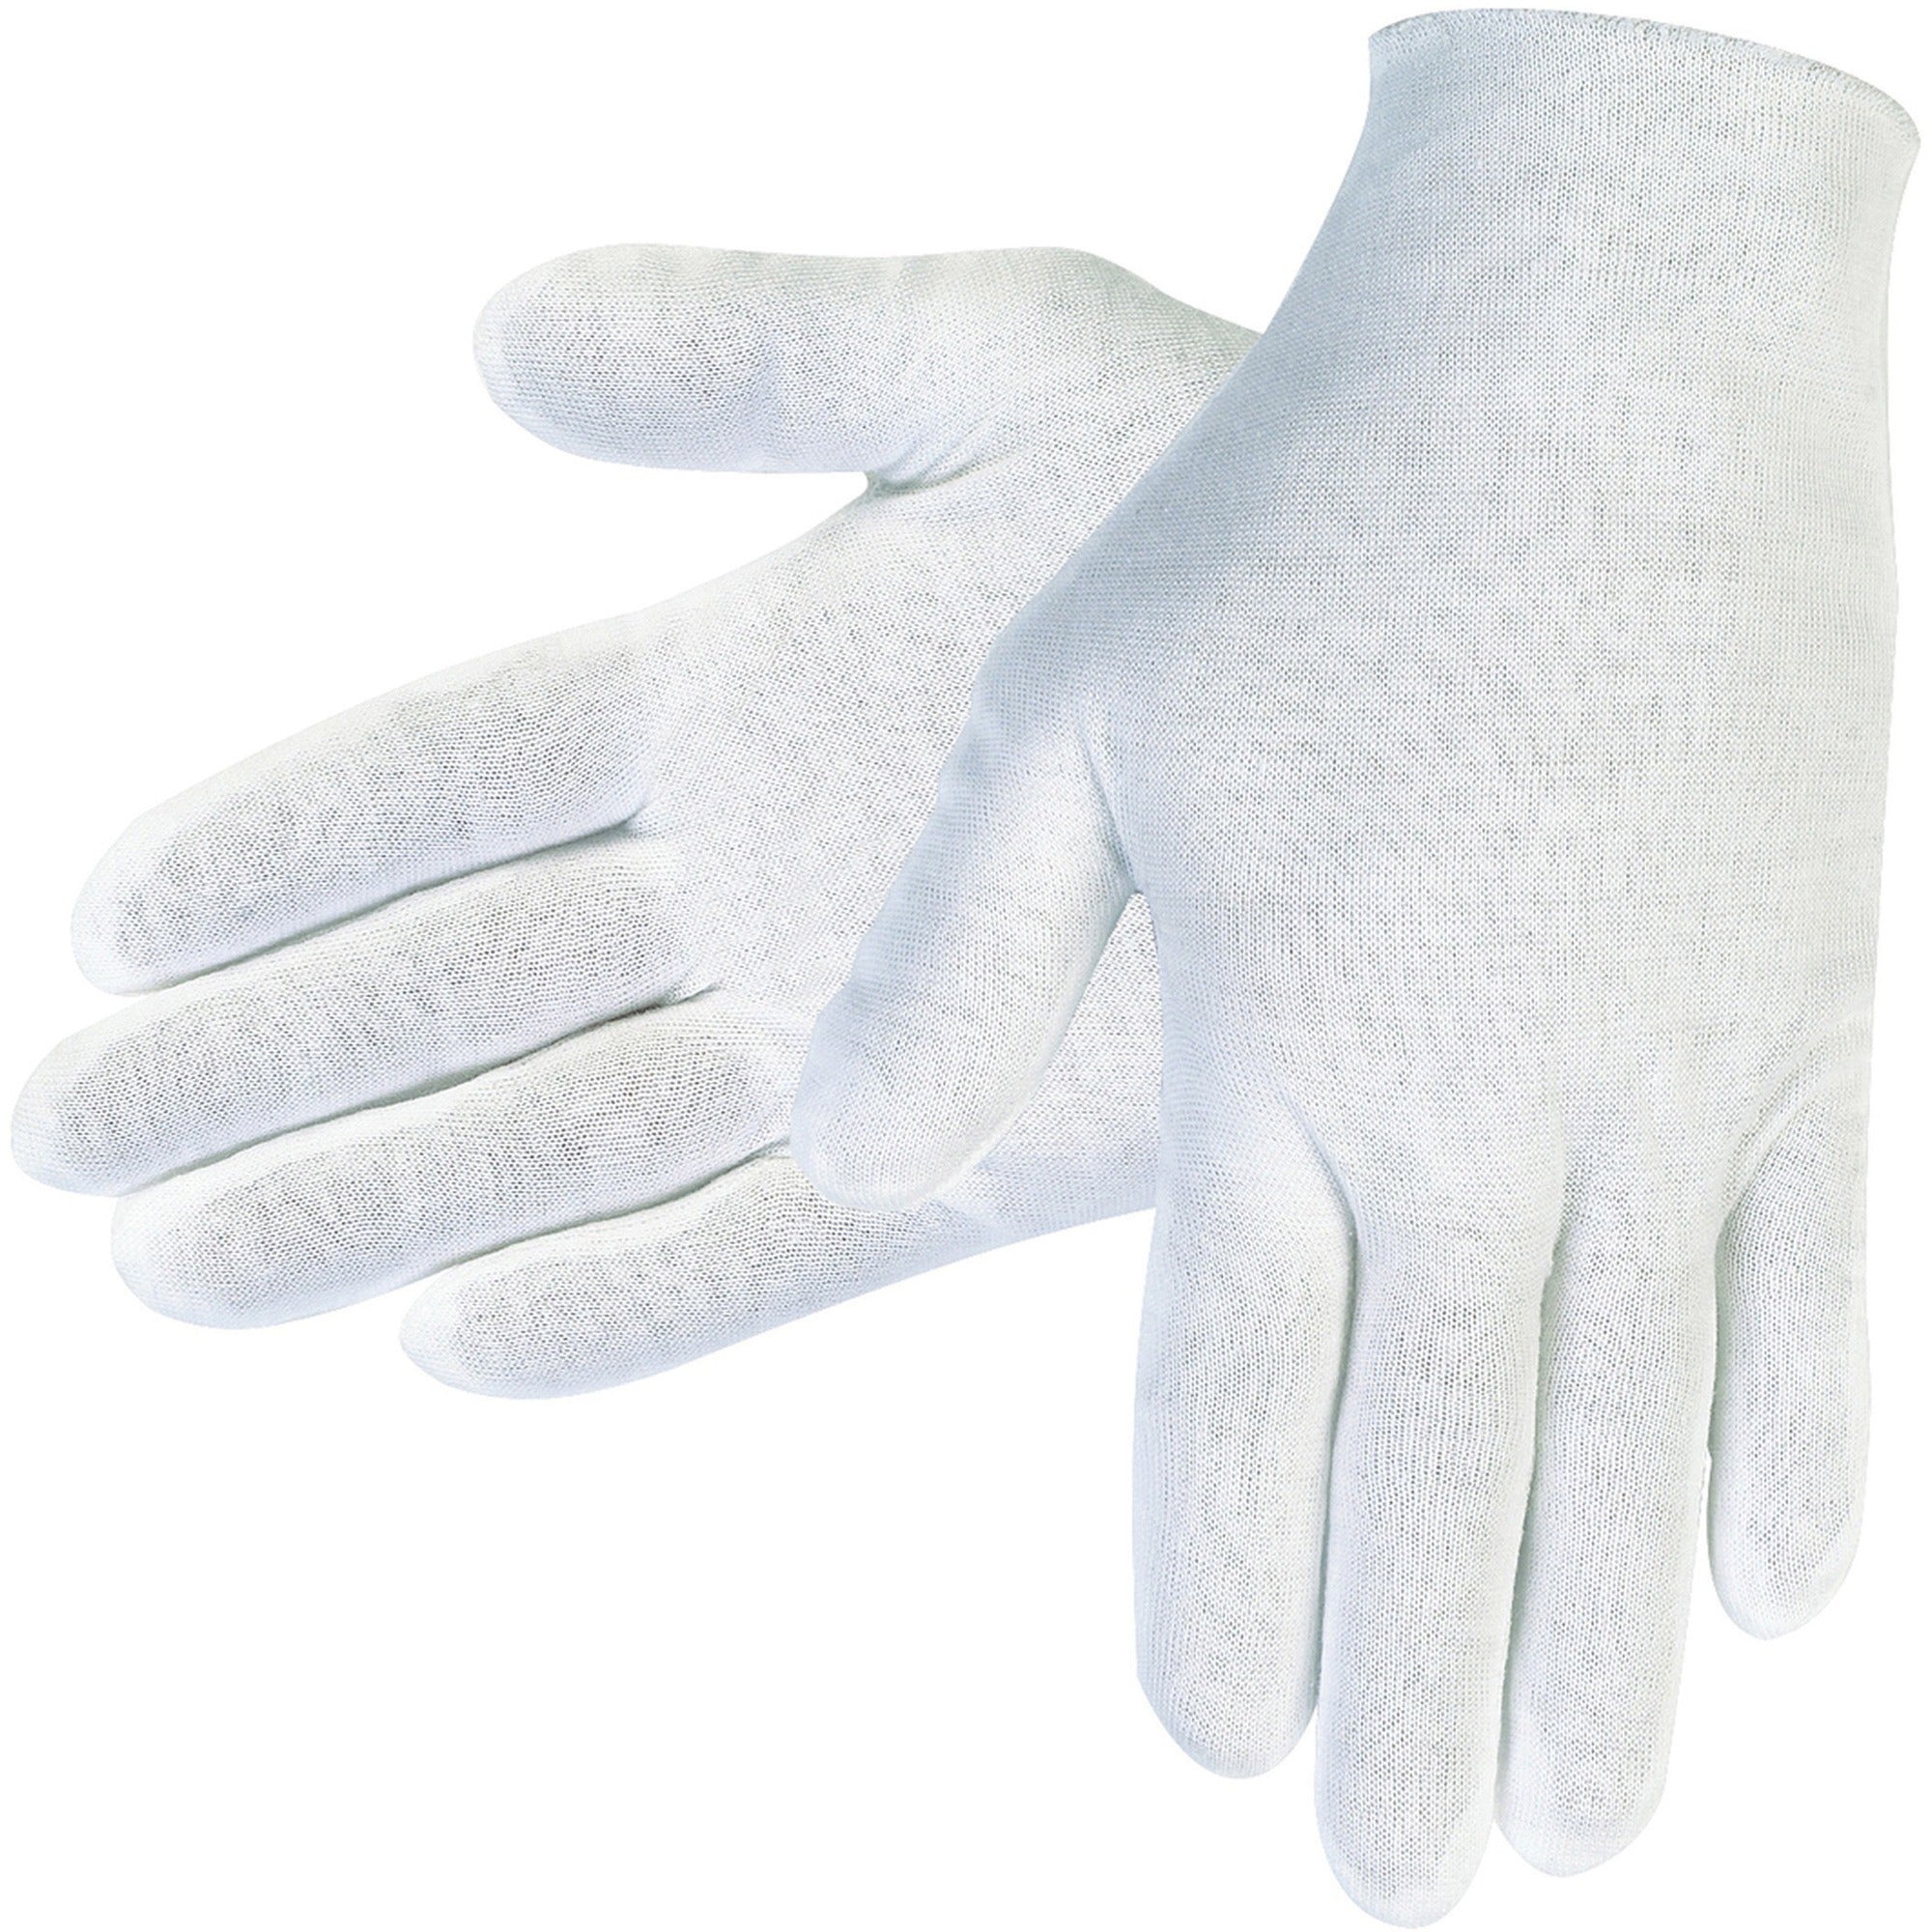 mcr-safety-inspectors-gloves-large-size-male-white-comfortable-lightweight-reversible-breathable-straight-thumb-for-assembling-construction-production-baggage-handling-12-pack_mcs8600c - 1